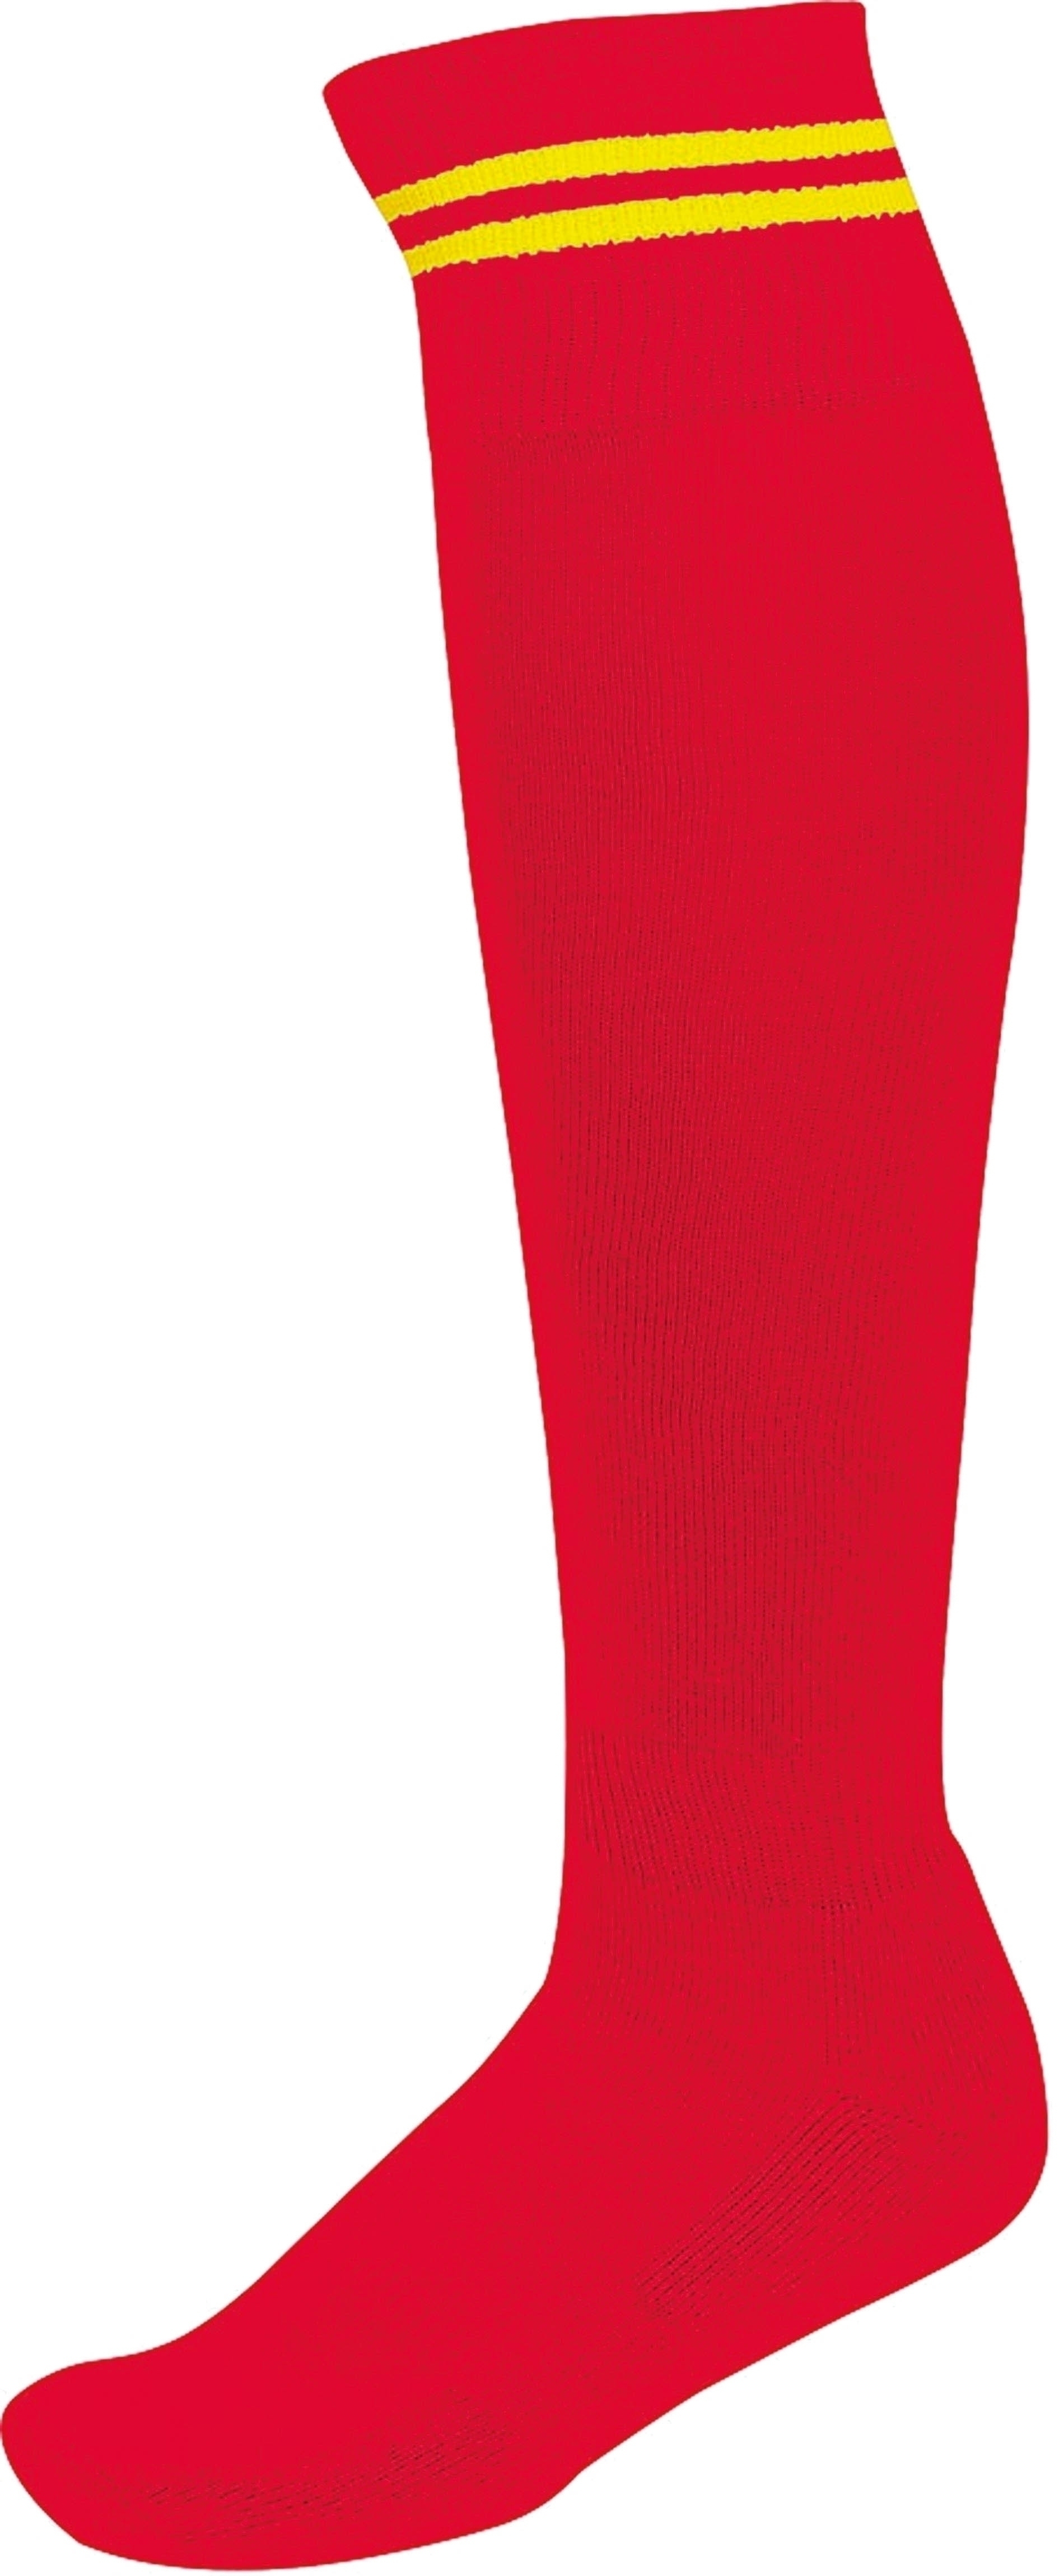 CHAUSSETTES DE SPORT RAYÉES Sporty Red / Sporty Yellow Rouge